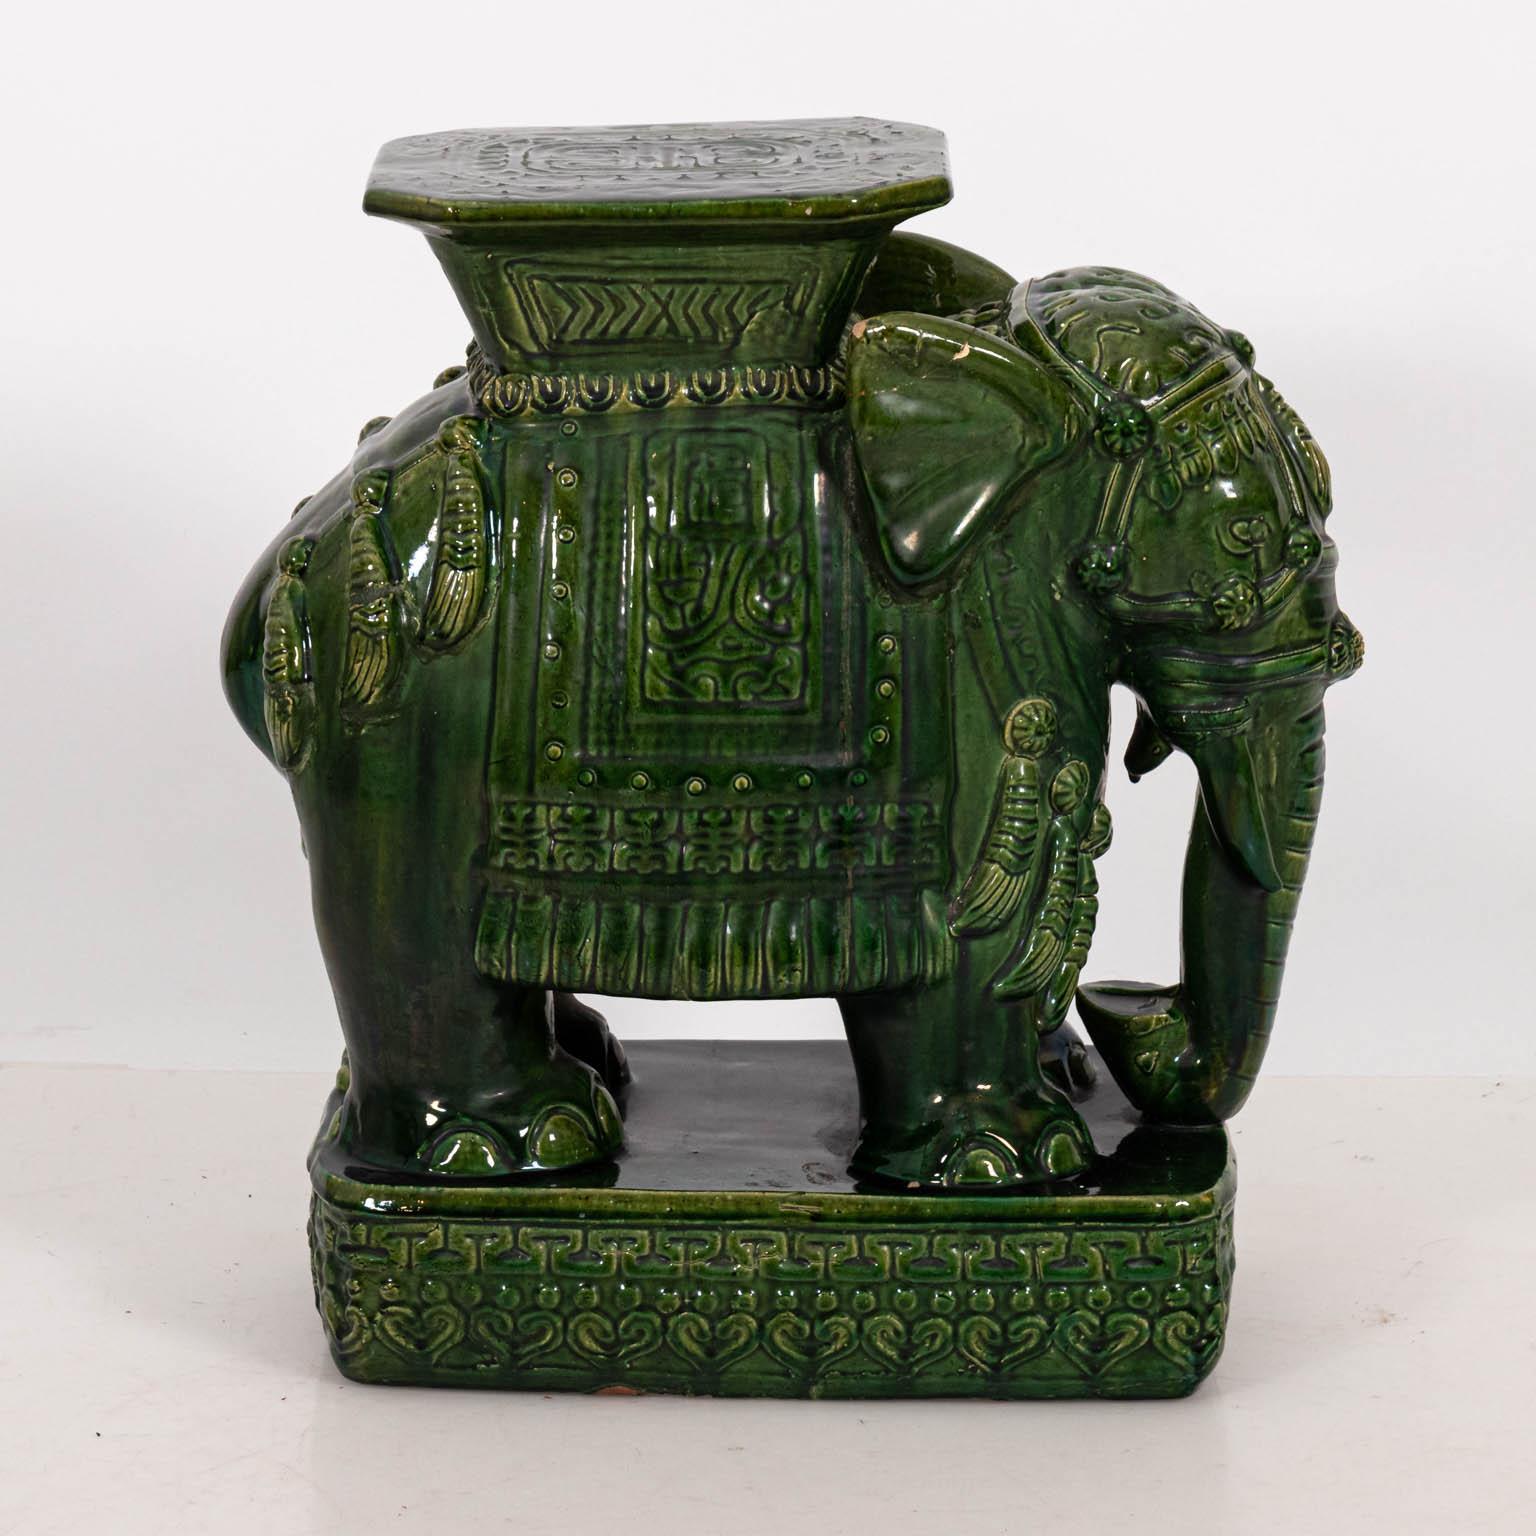 Pair of large green glazed terracotta garden seats in the shape of Elephants, circa 20th century. Please note of wear consistent with age including finish loss and minor chips.